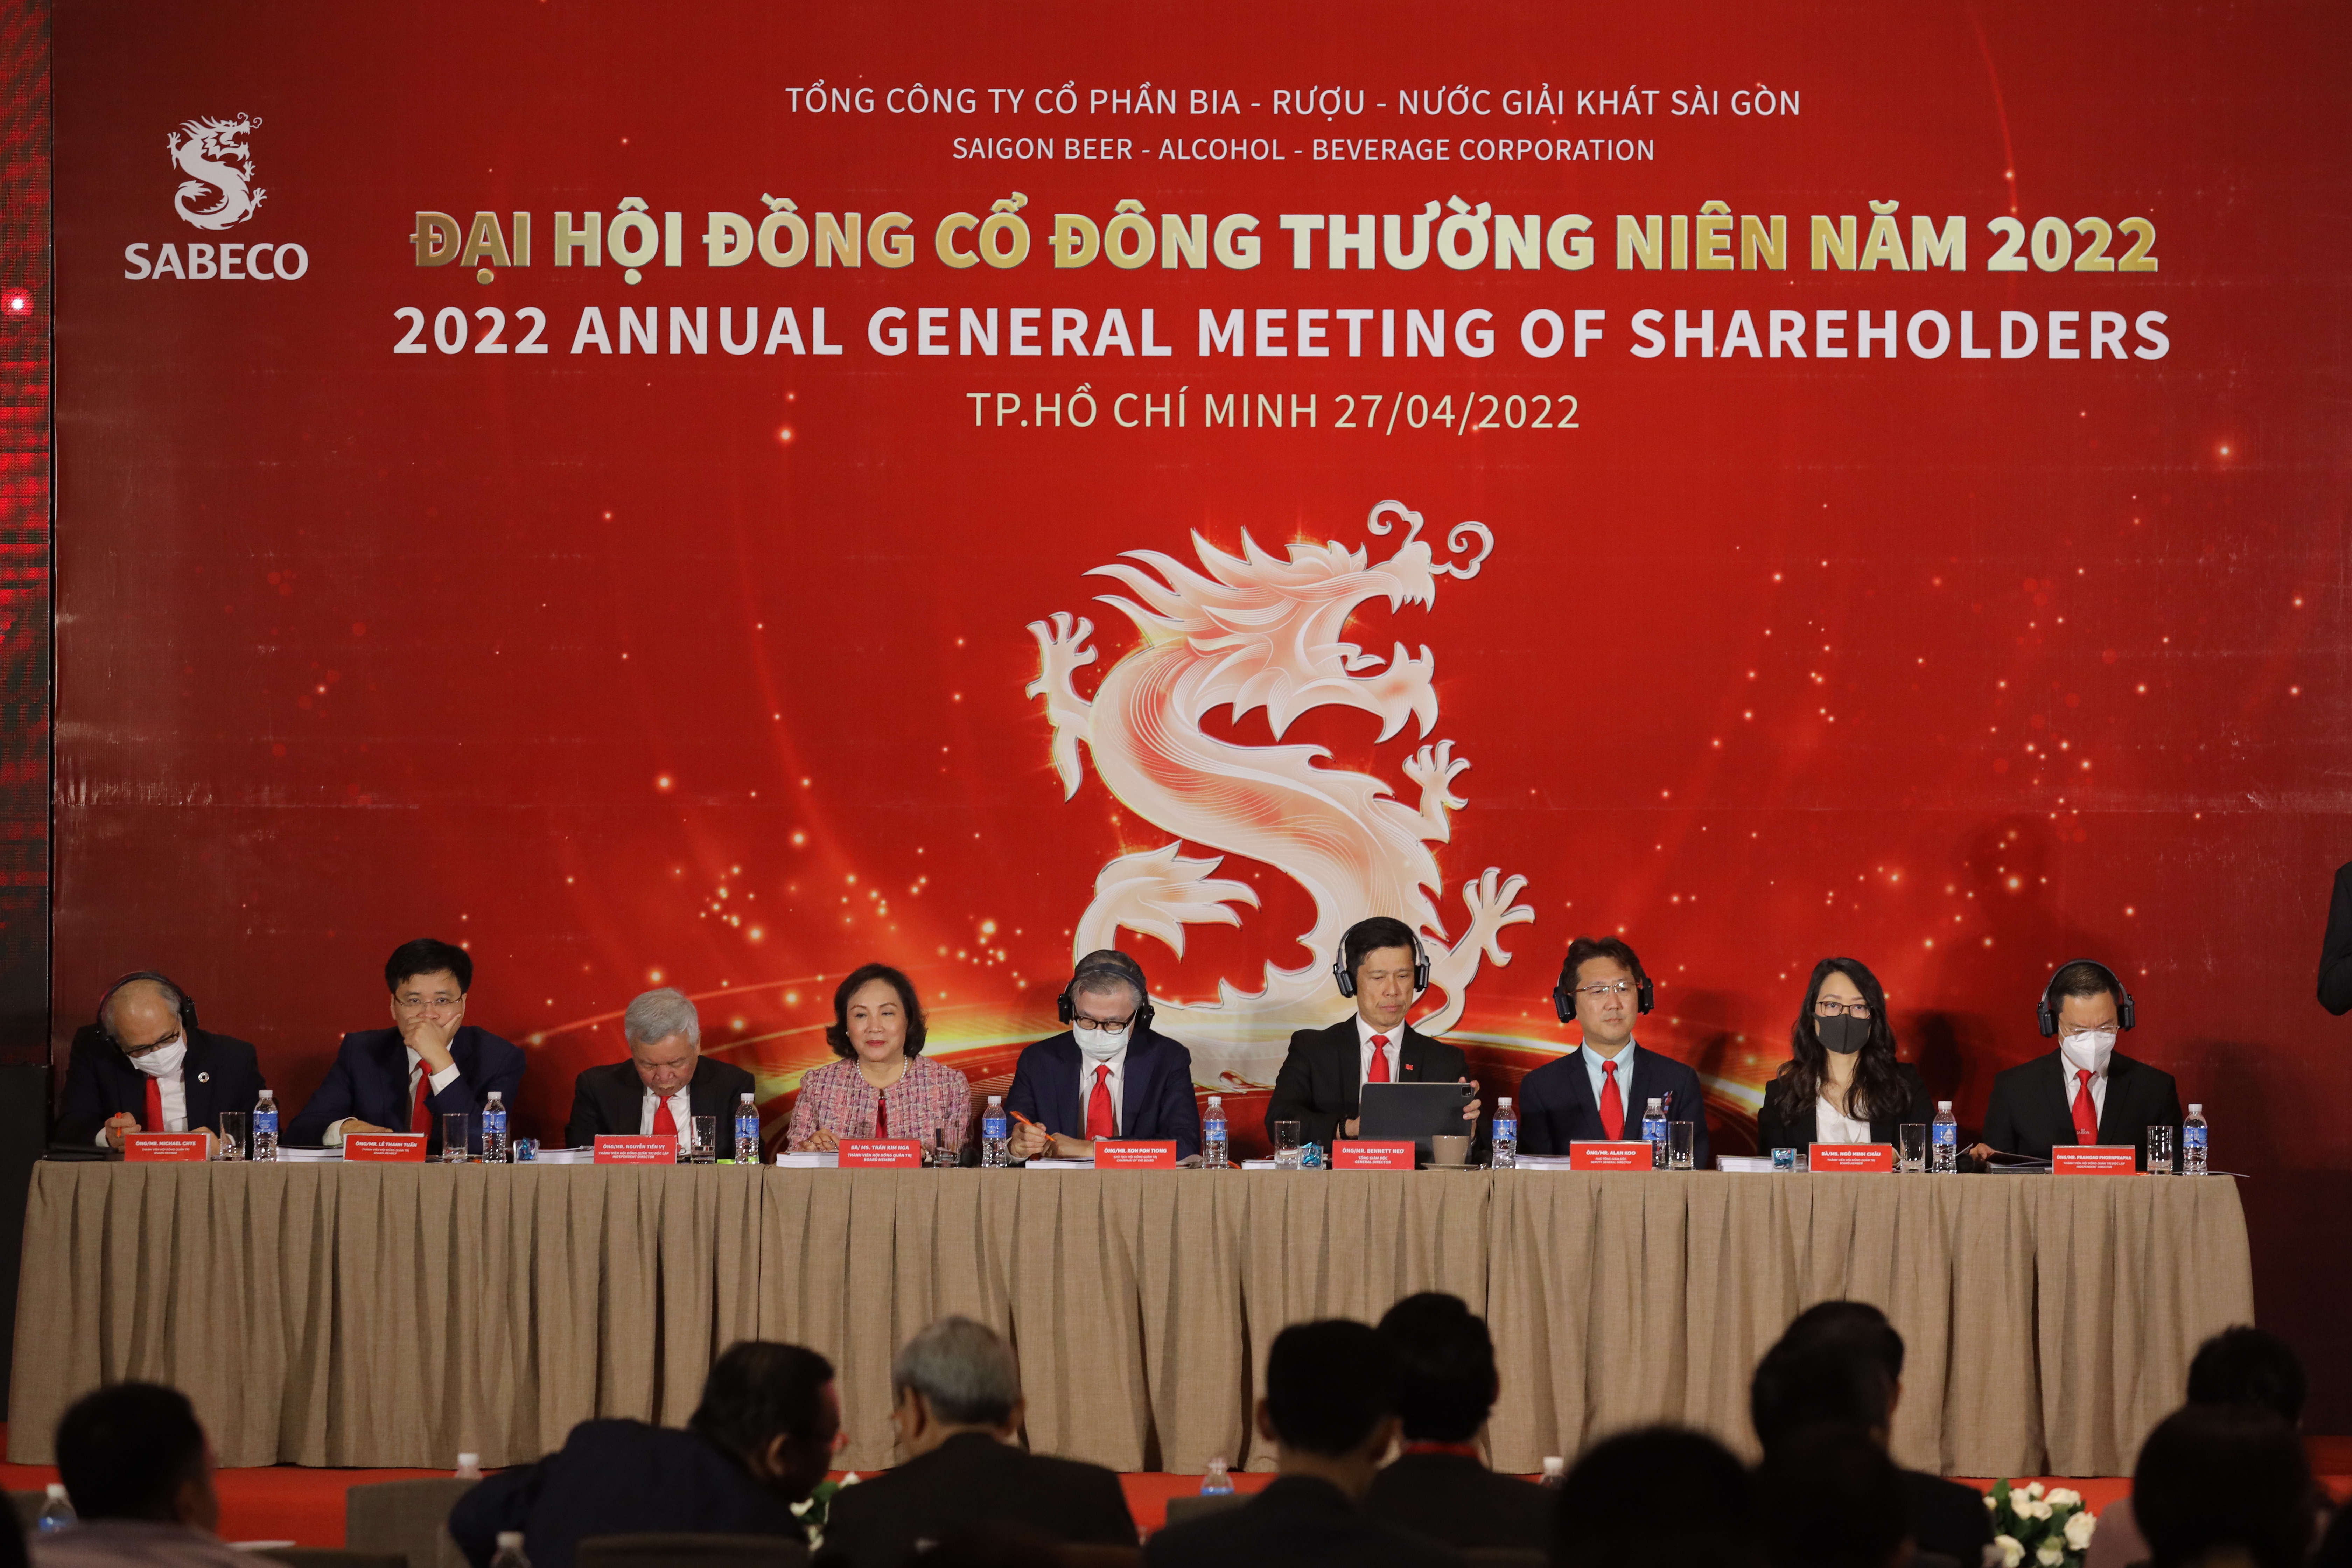 SABECO ORGANIZED ITS 2022 ANNUAL GENERAL MEETING OF SHAREHOLDERS